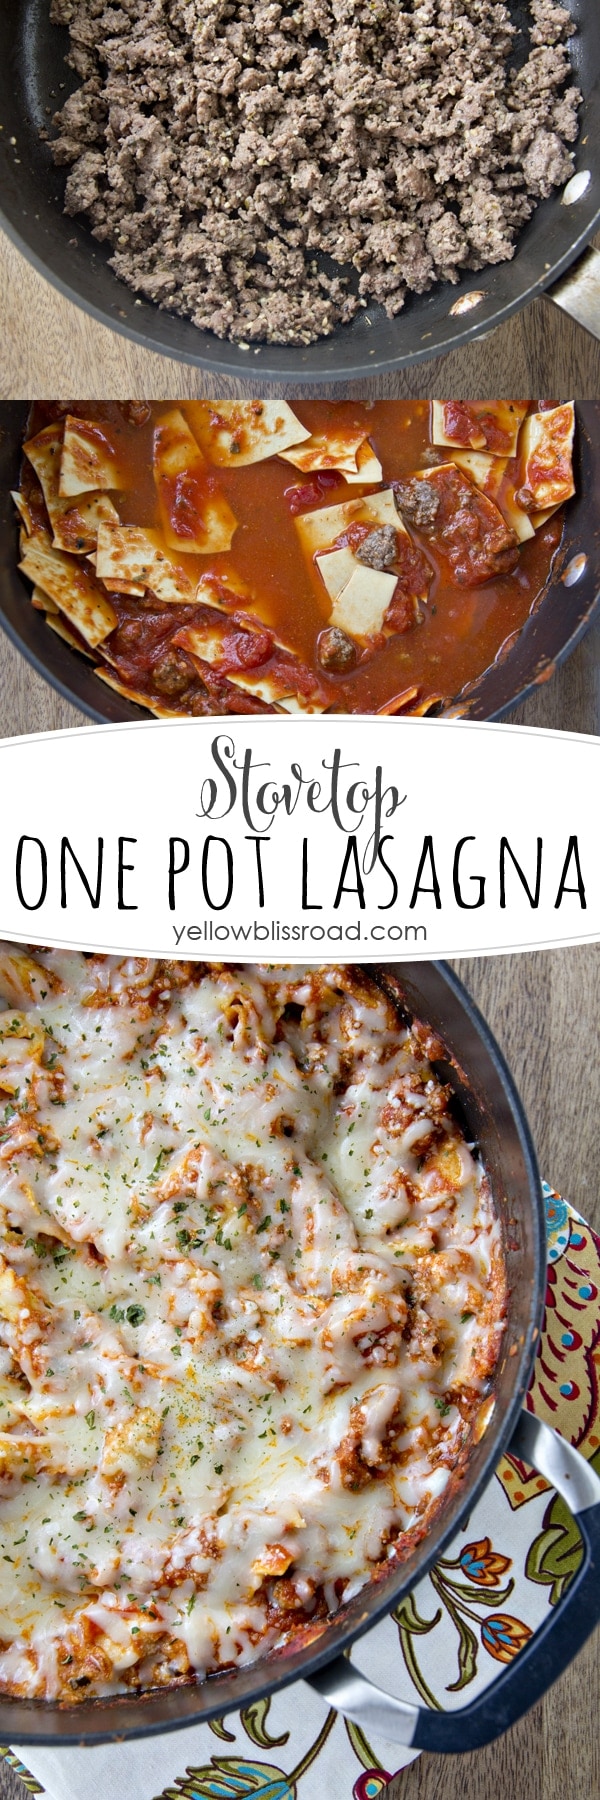 Stovetop One Pot Lasagna - Ready in 30 minutes and perfect for busy weeknights! #pmedia #joytothetable #ad